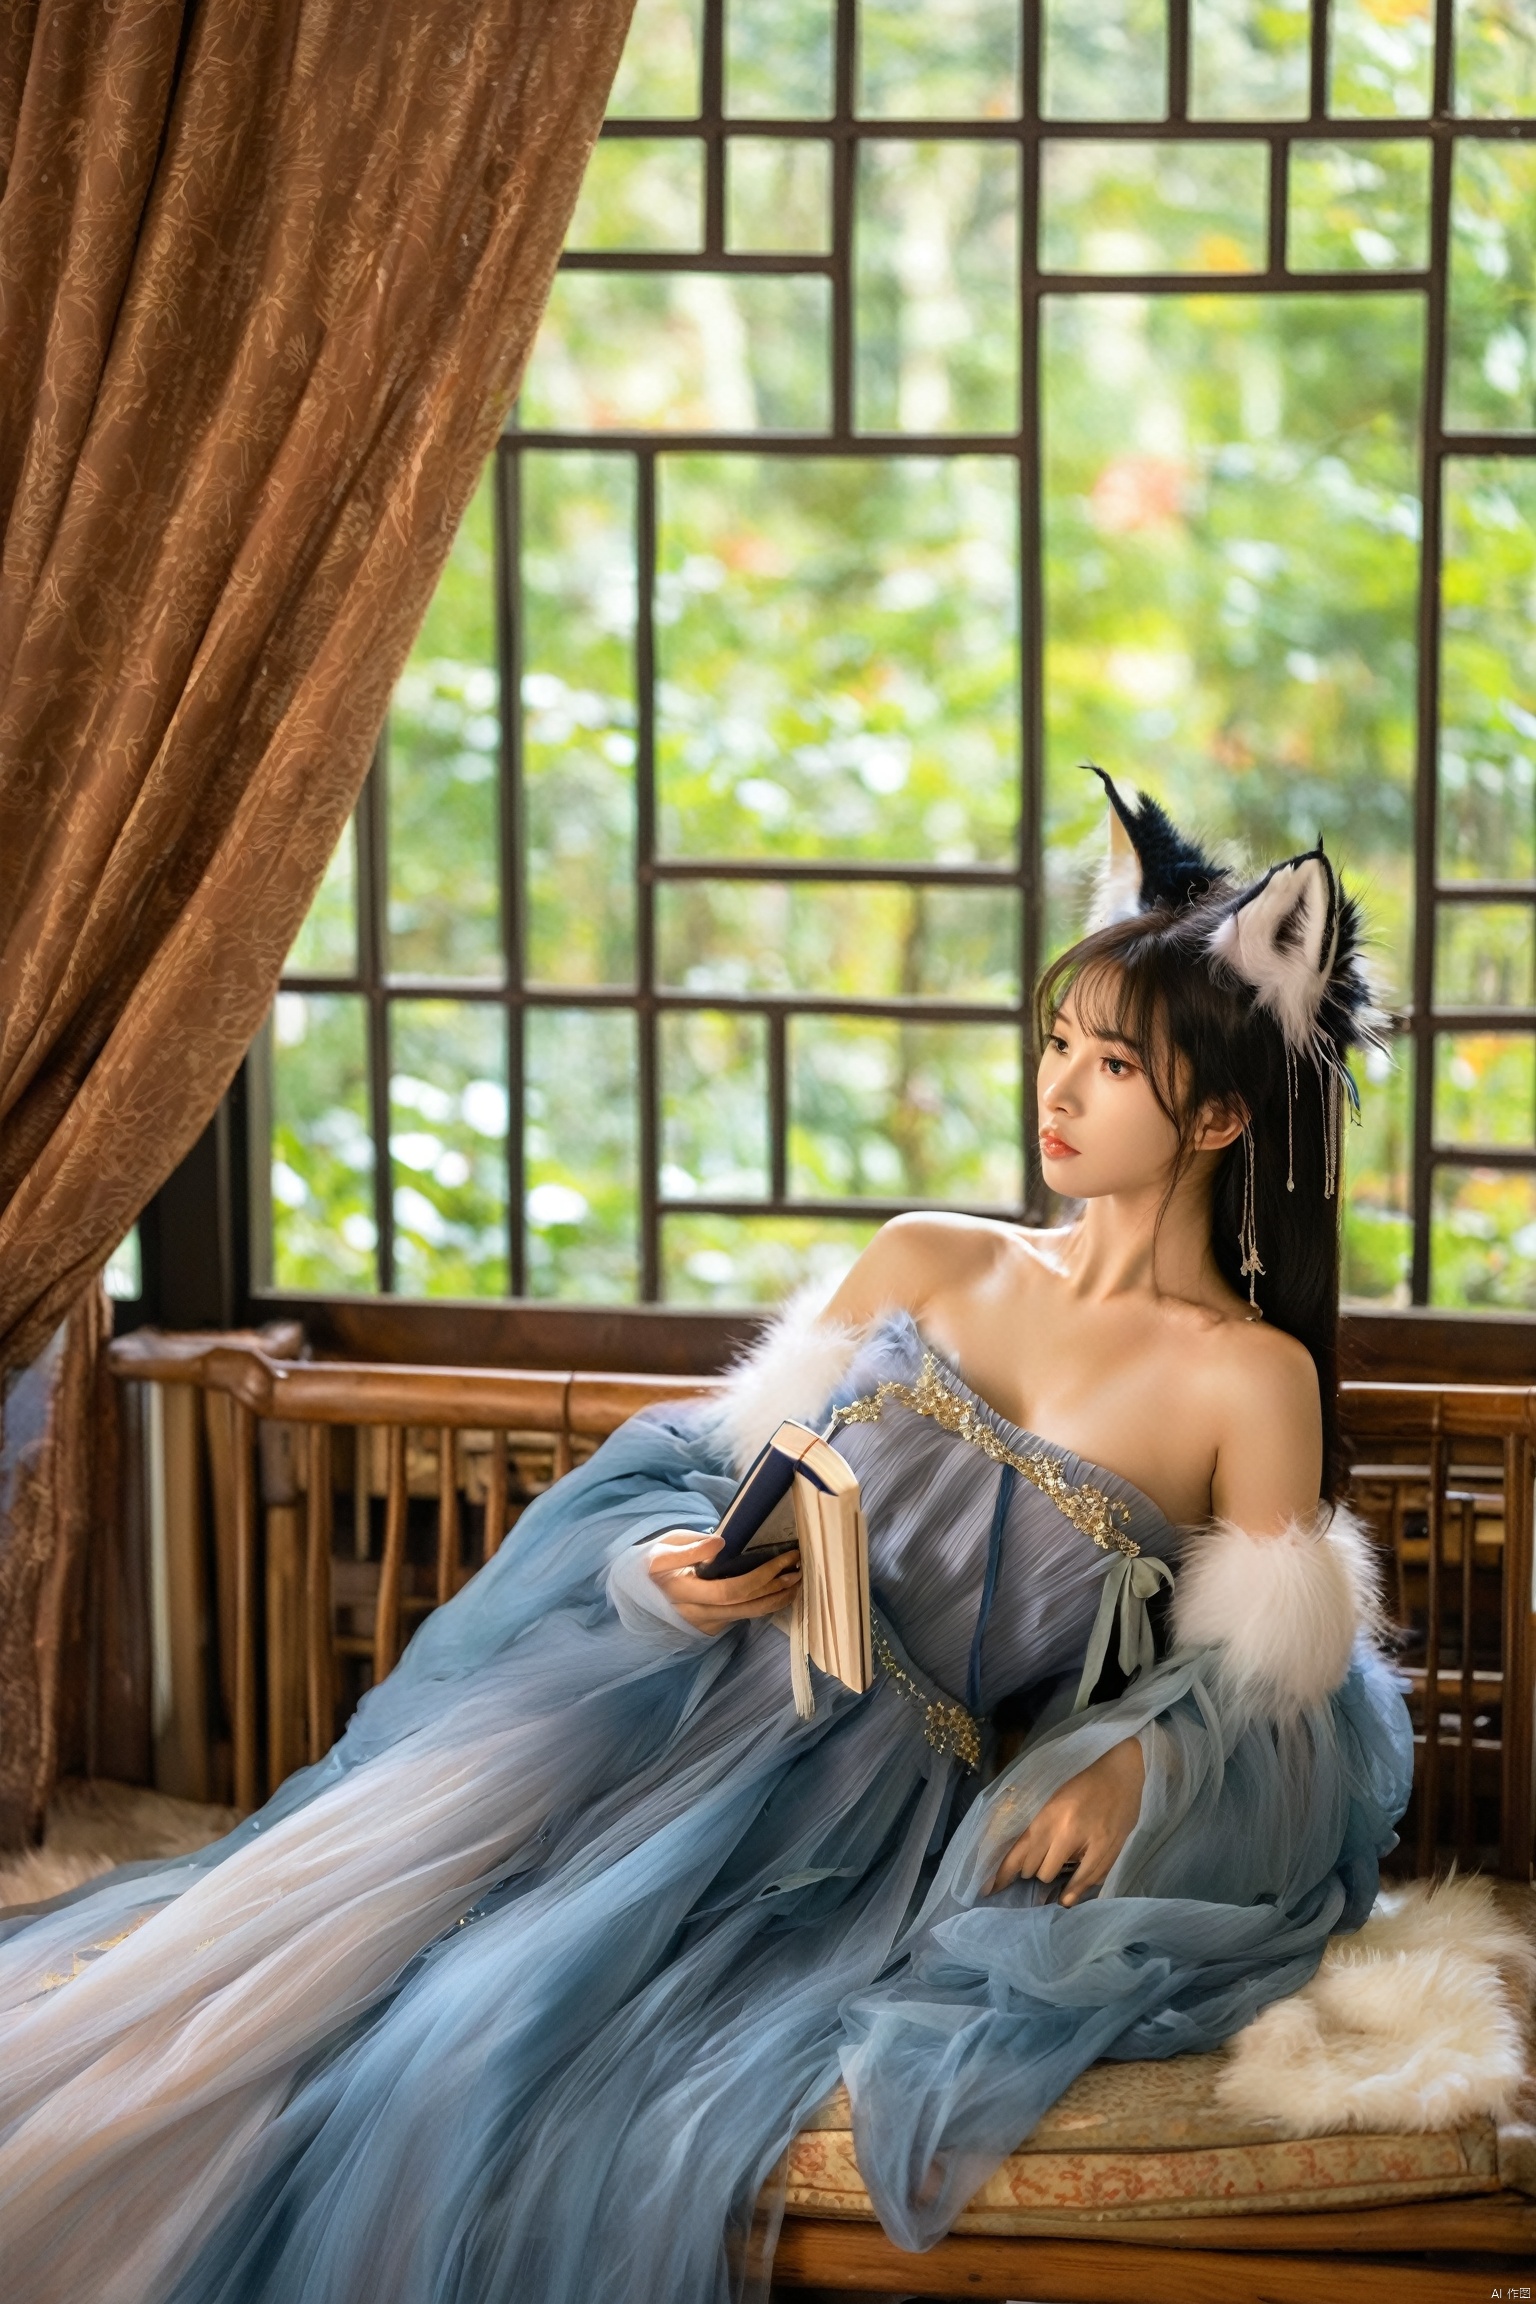 Lying on a couch by the window, the fox spirit holds a Bamboo Book in her hands. She's adorned in a blue off-shoulder long dress that slips down to her arms, the soft fabric accentuating her fox ears and a glimpse of her fluffy tail. Her gaze, though focused and profound as she reads, exudes an unintentional sensuality and allure. The room is bathed in the soft glow of the moonlight filtering through the window, creating a serene ambiance. The play of light and shadow across her dress adds a layer of depth and mystery, while the off-shoulder design of her garment teases with a subtle hint of her seductive form. It's an image that captivates, making it difficult for onlookers to avert their eyes.